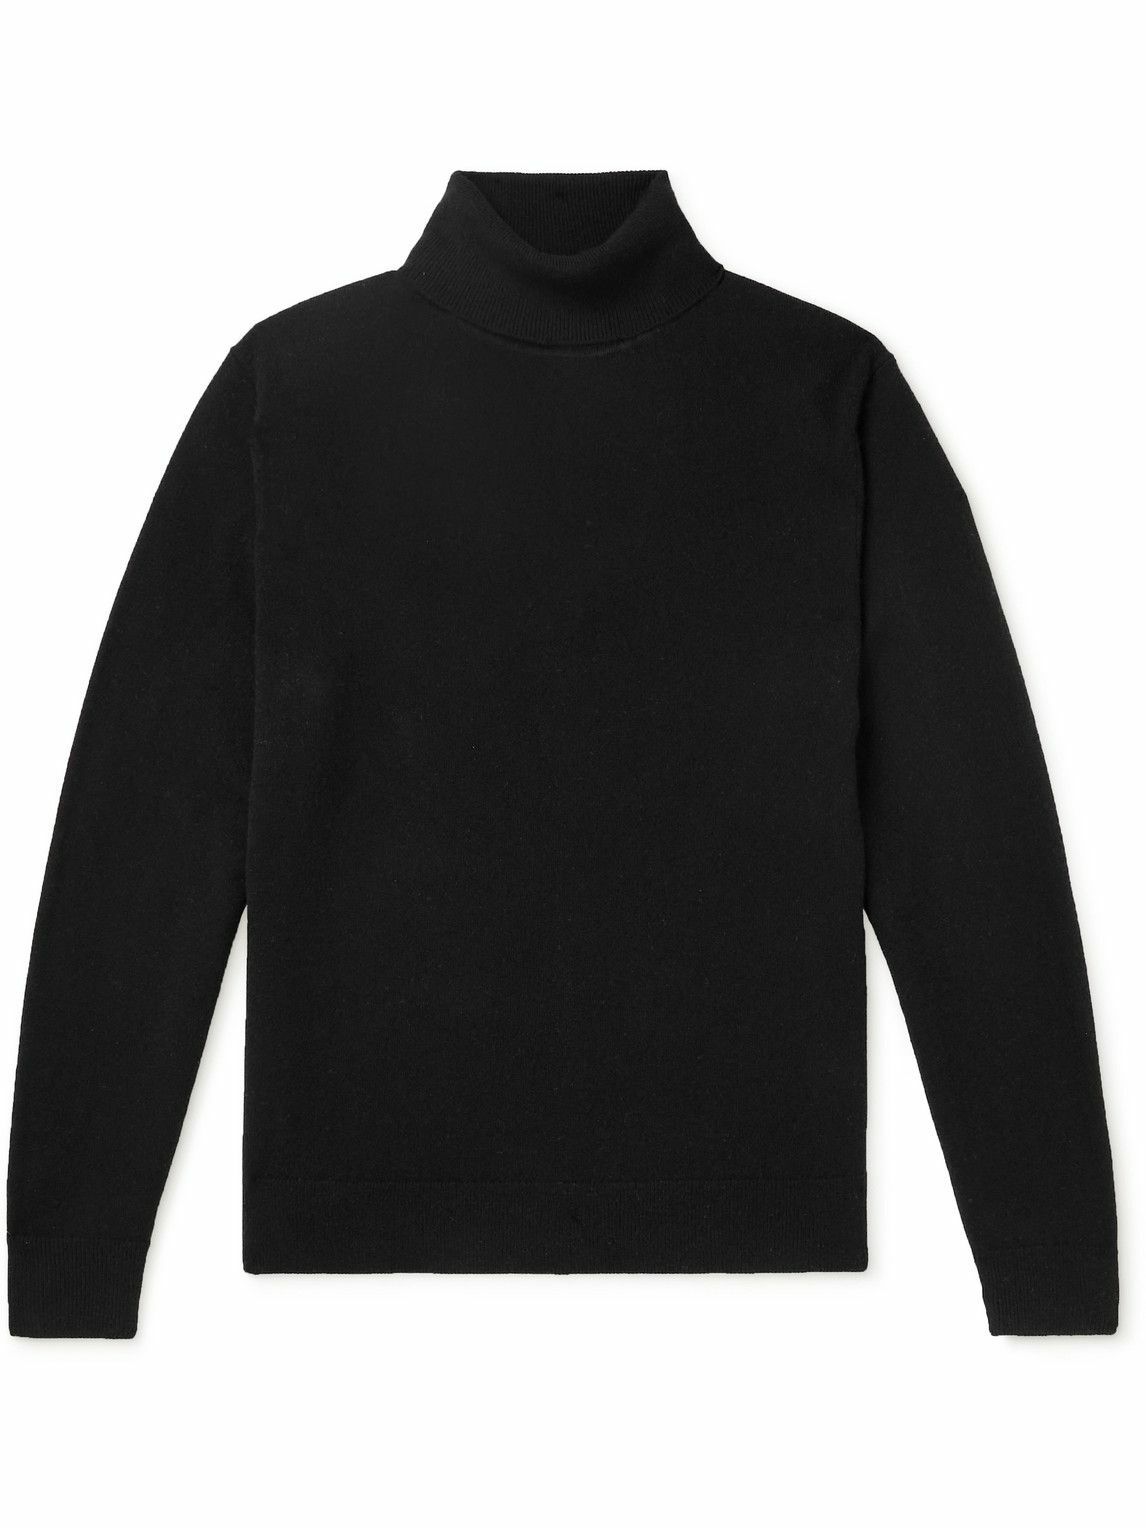 Theory - Hilles Cashmere Rollneck Sweater - Black Theory